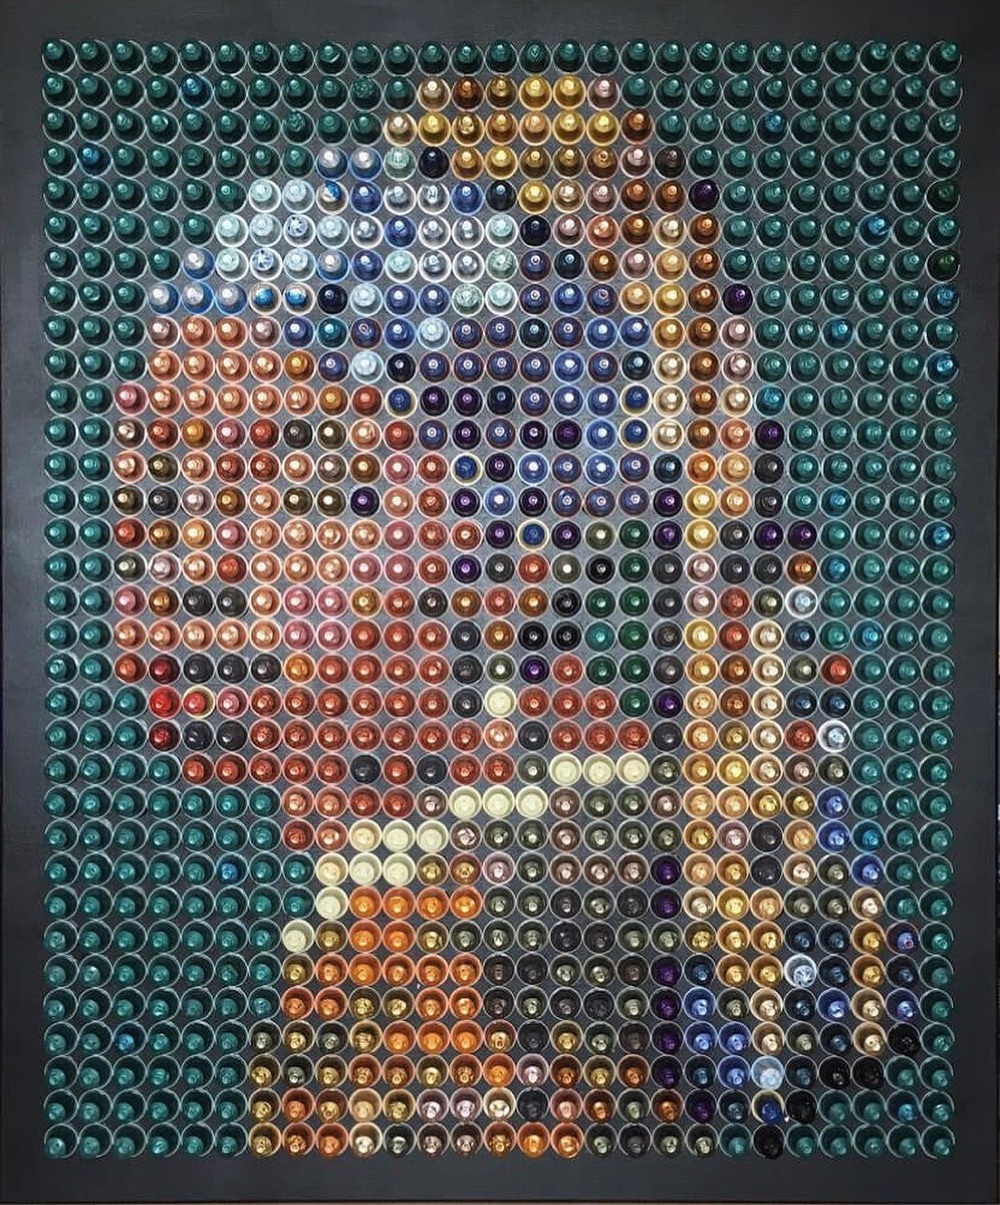 remix of Girl With a Pearl Earring made from Nespresso pods